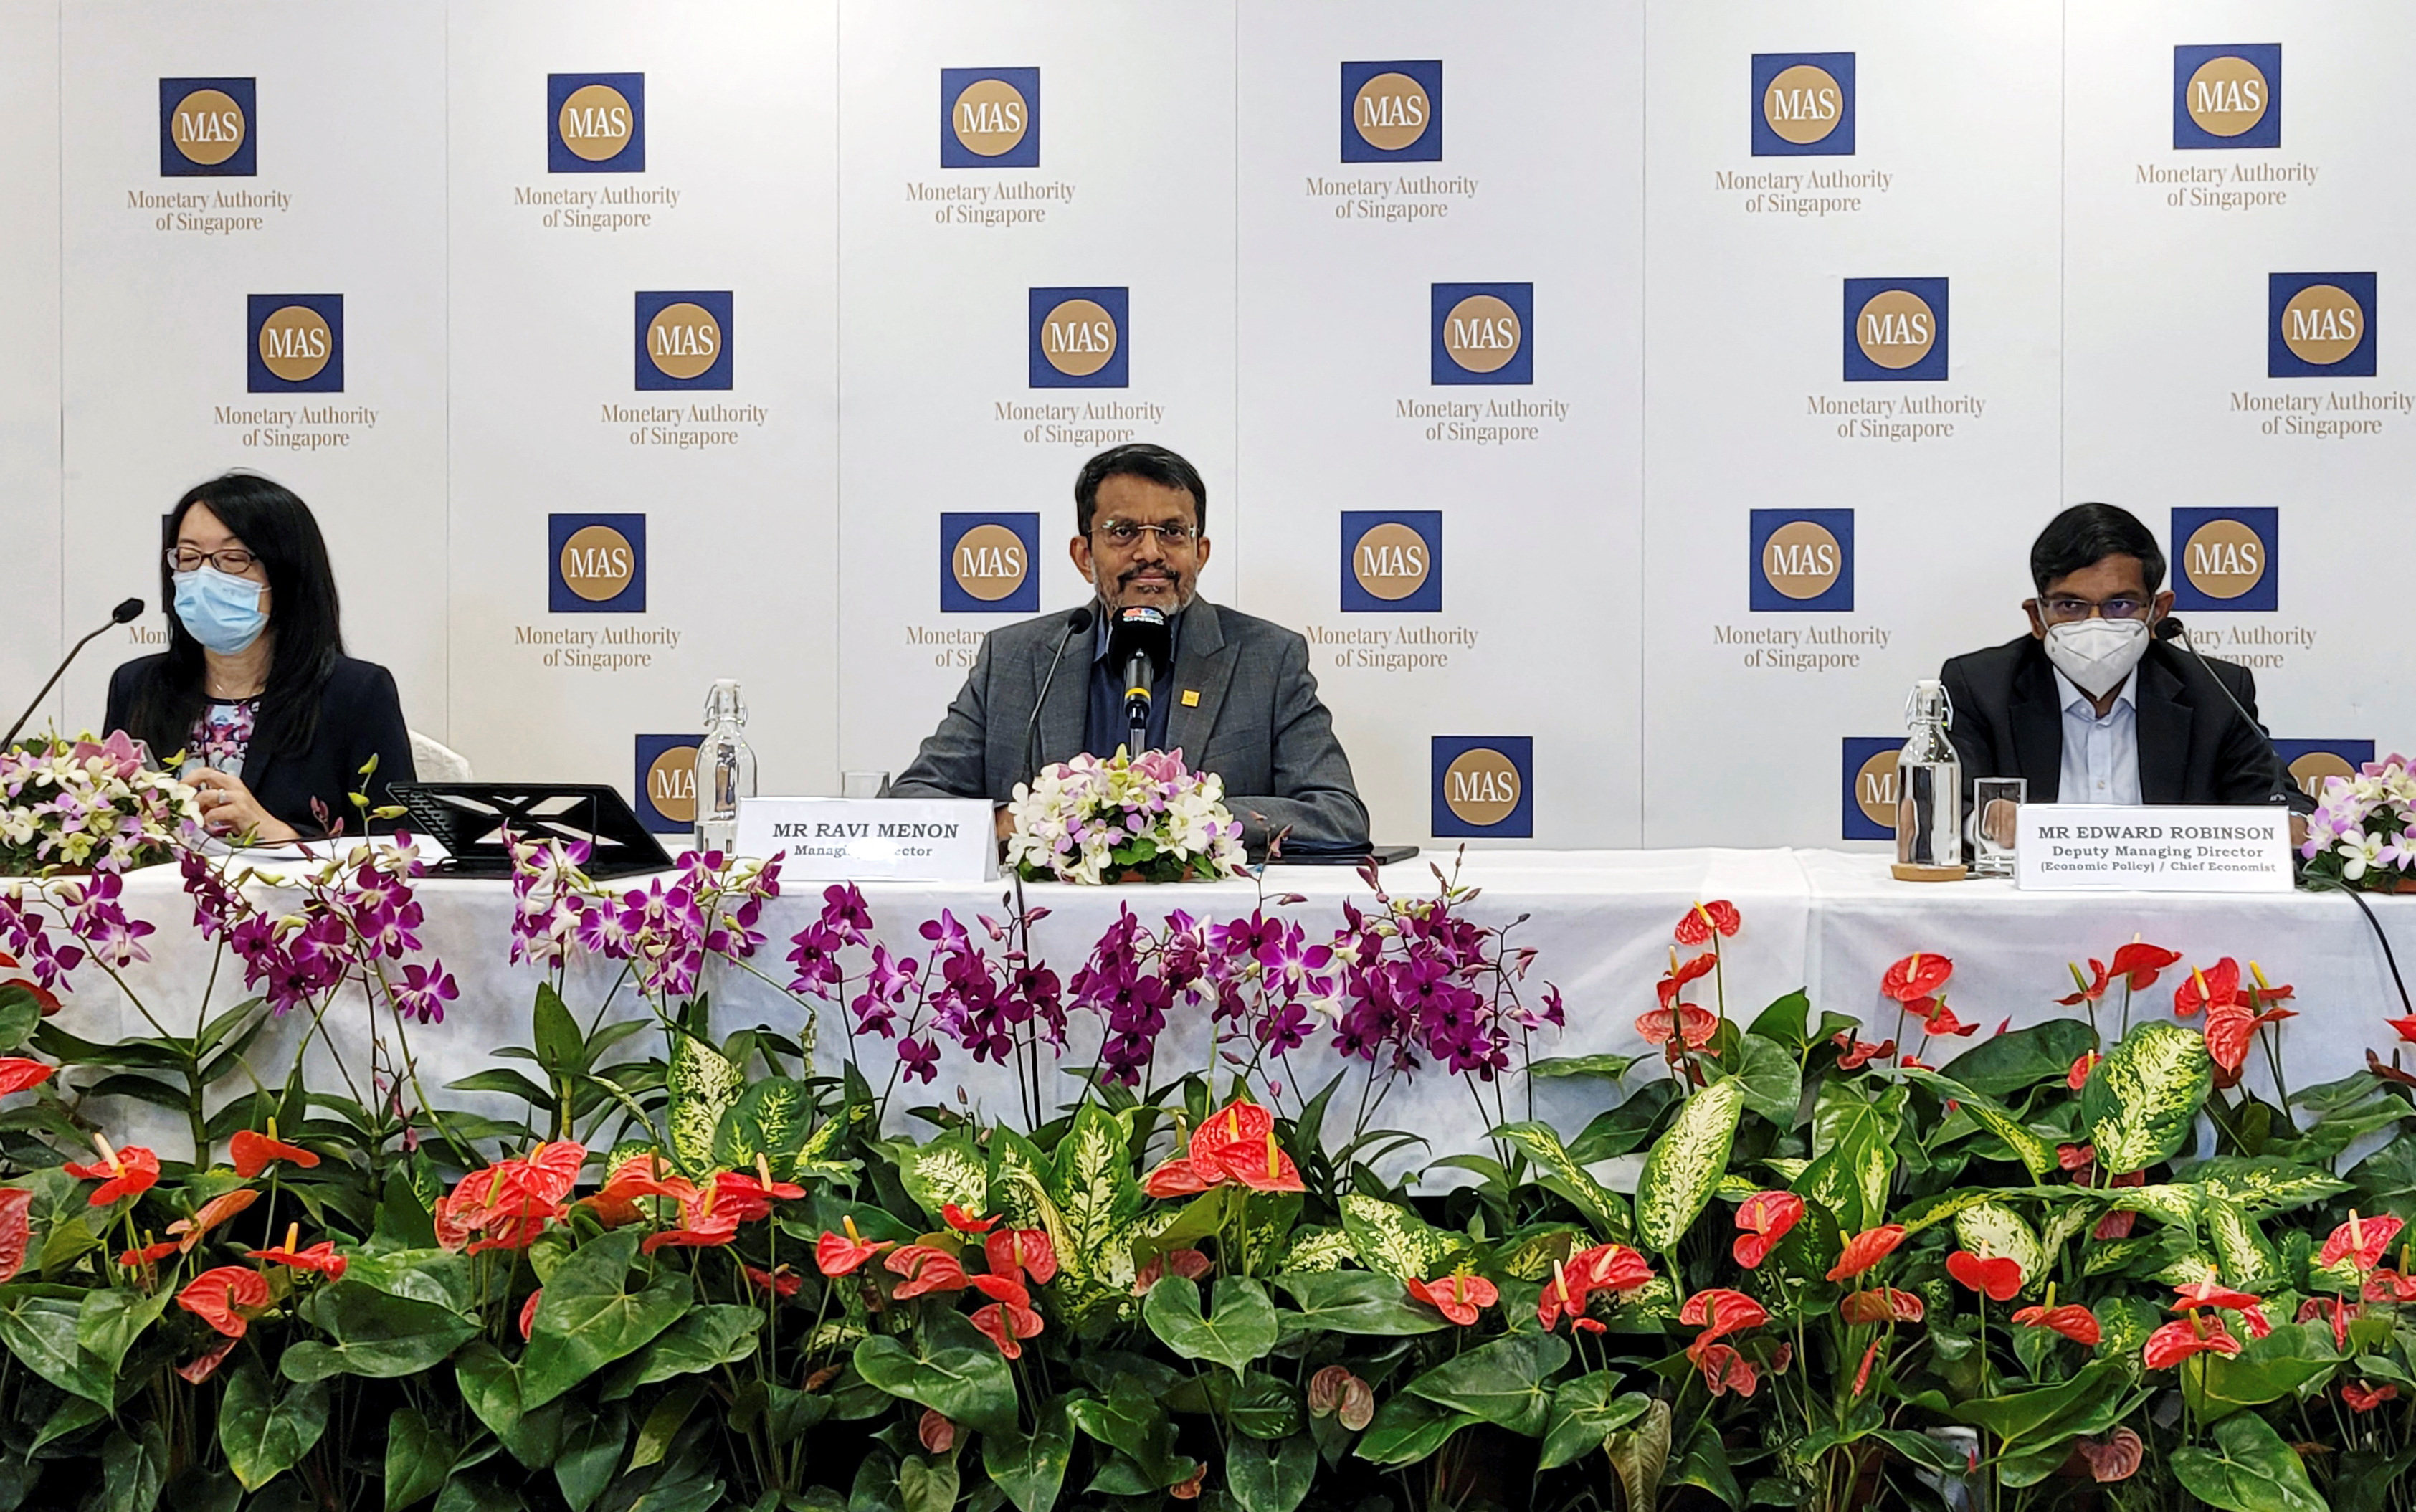 Ravi Menon, the managing director of the Monetary Authority of Singapore. Photo: Reuters